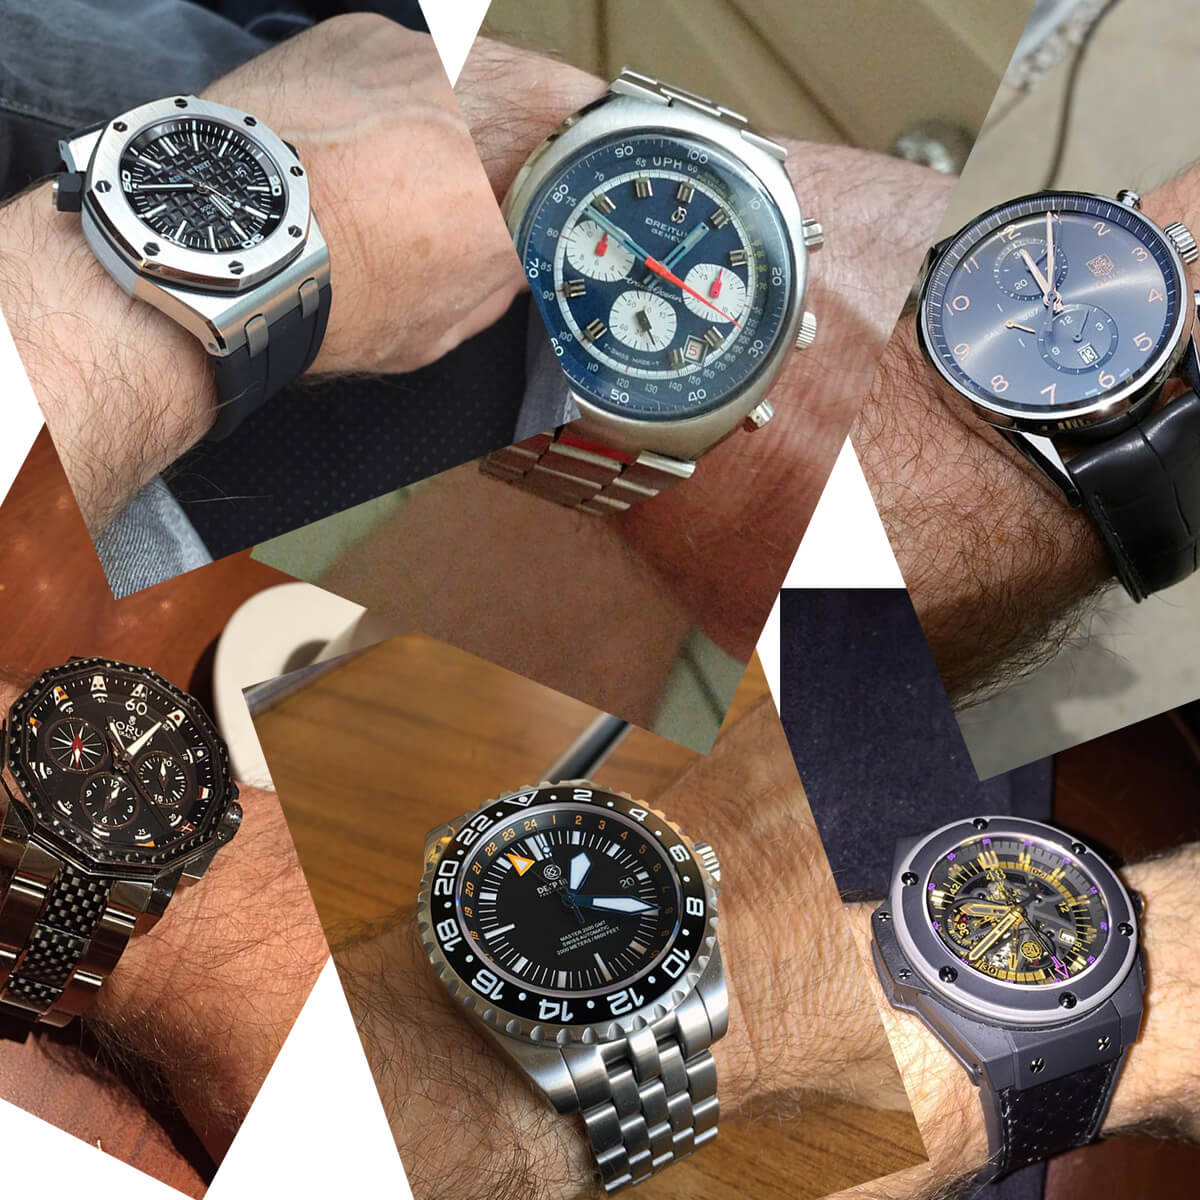 A few of the watches in Eric Singer's collection: (clockwise from top left) Audemars Piguet Royal Oak Offshore Diver, vintage Breitling Transocean, TAG Heuer Carrera 1887, Hublot Kobe Bryant Black Mamba, Deep Blue Master 2000 GMT, and Corum Admiral’s Cup Challenge Split-Seconds